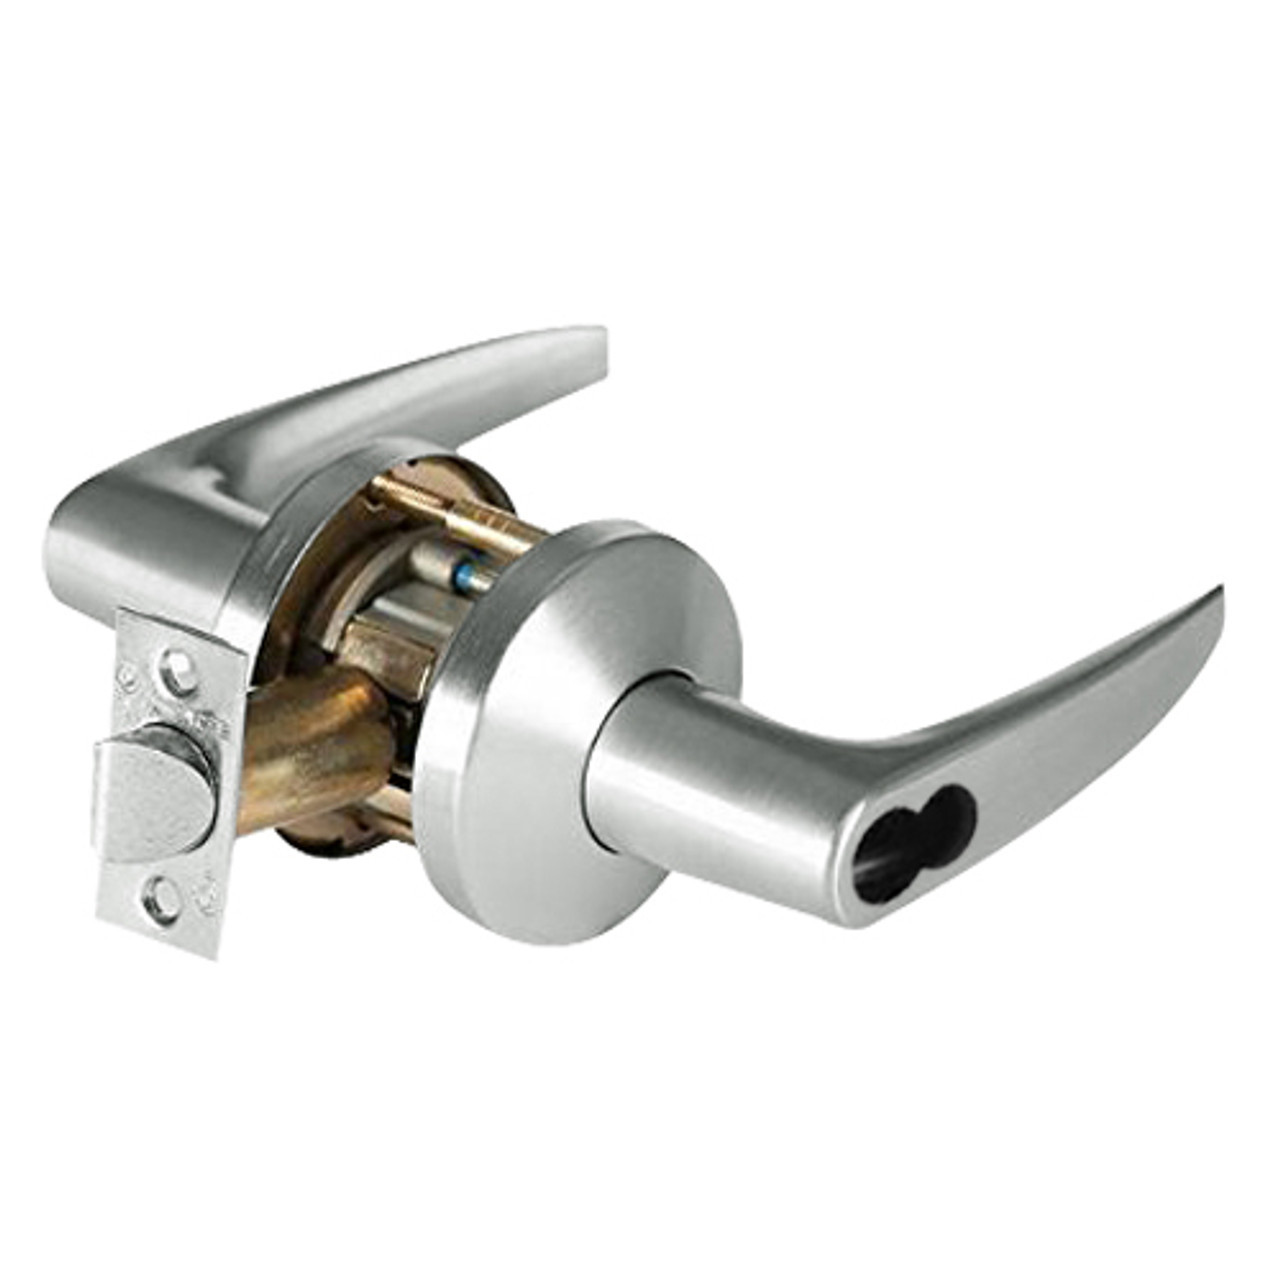 9K37YR16KSTK618LM Best 9K Series Special Function Cylindrical Lever Locks with Curved without Return Lever Design Accept 7 Pin Best Core in Bright Nickel